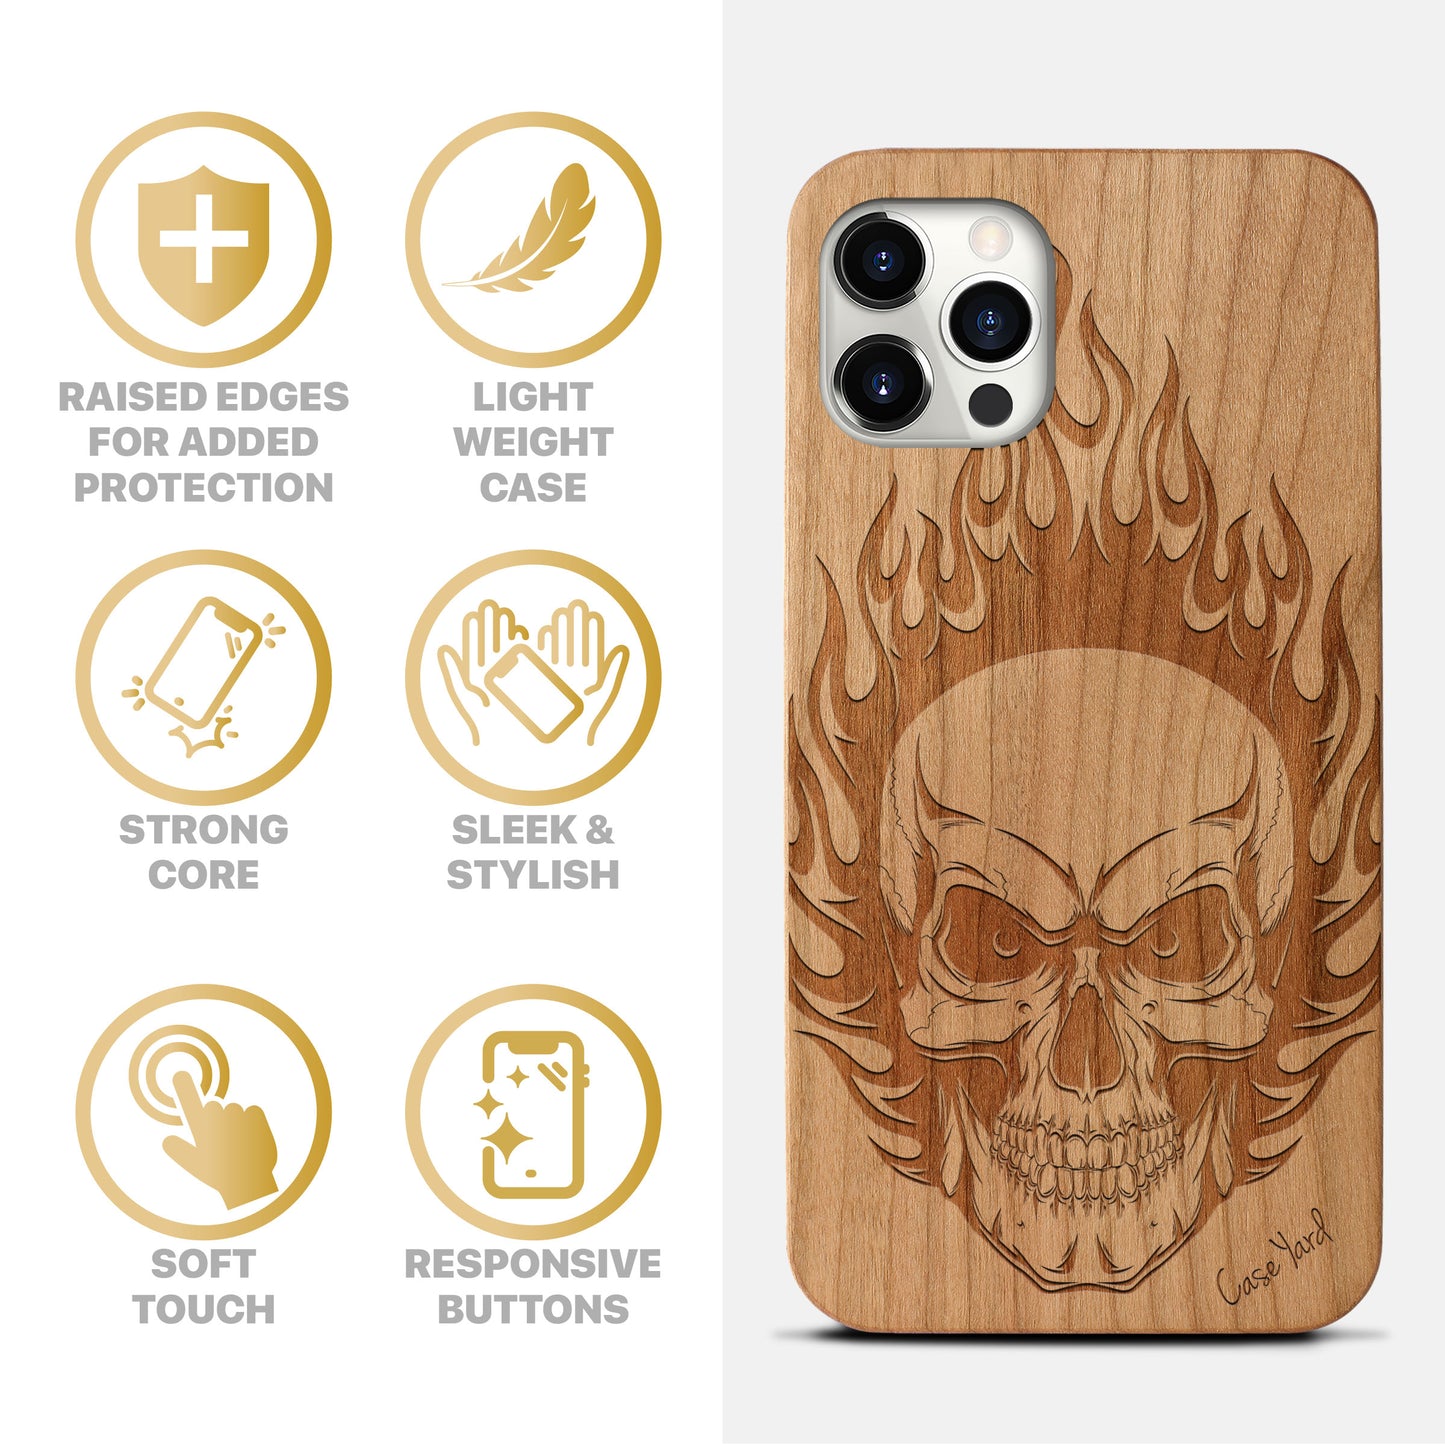 Wooden Cell Phone Case Cover, Laser Engraved case for iPhone & Samsung phone Skull On Fire Design